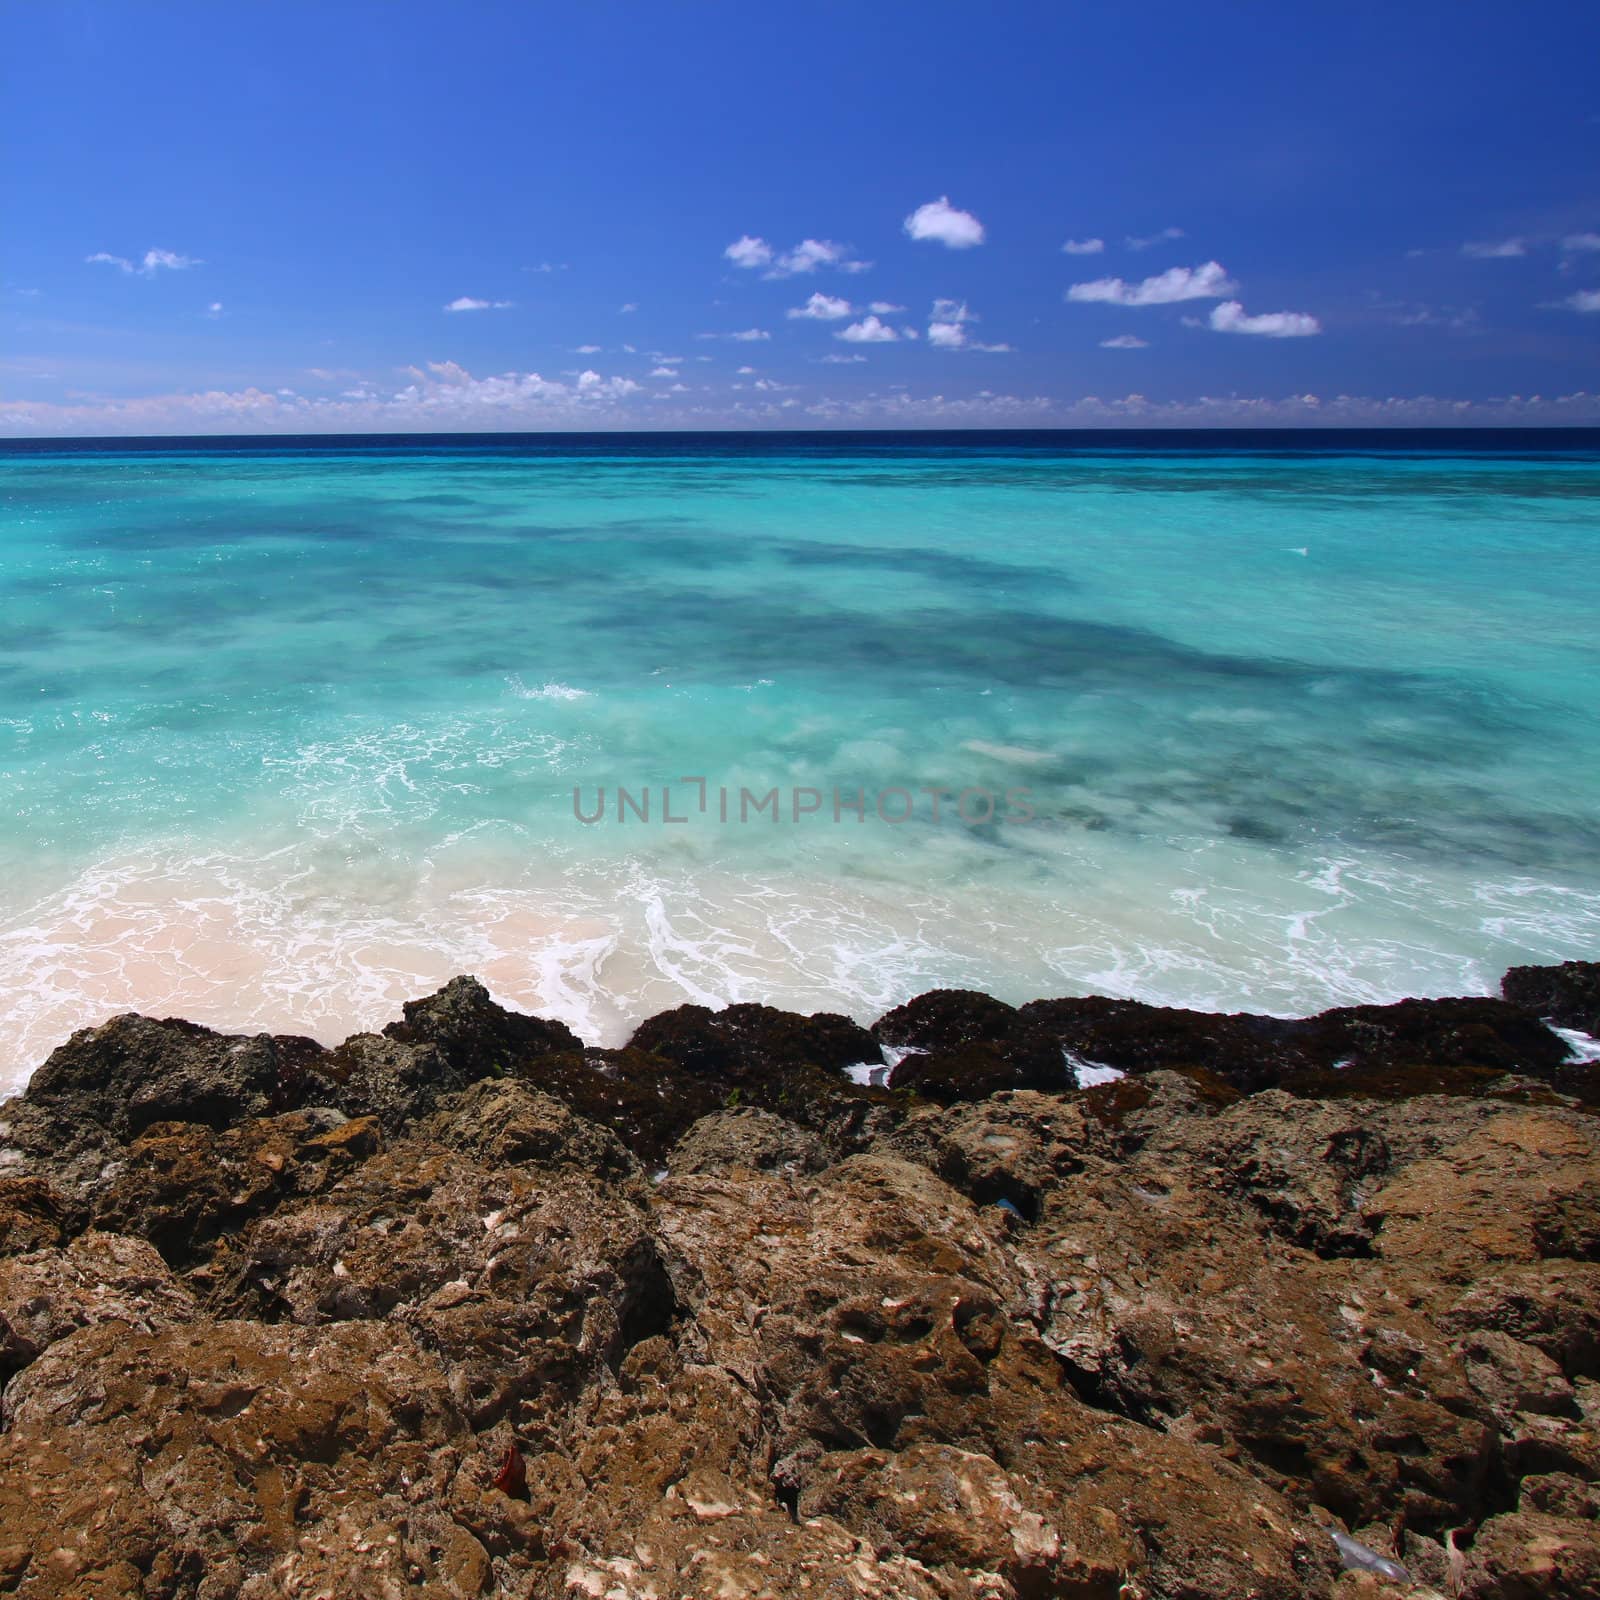 View of the Caribbean from the rocky coast of Barbados.